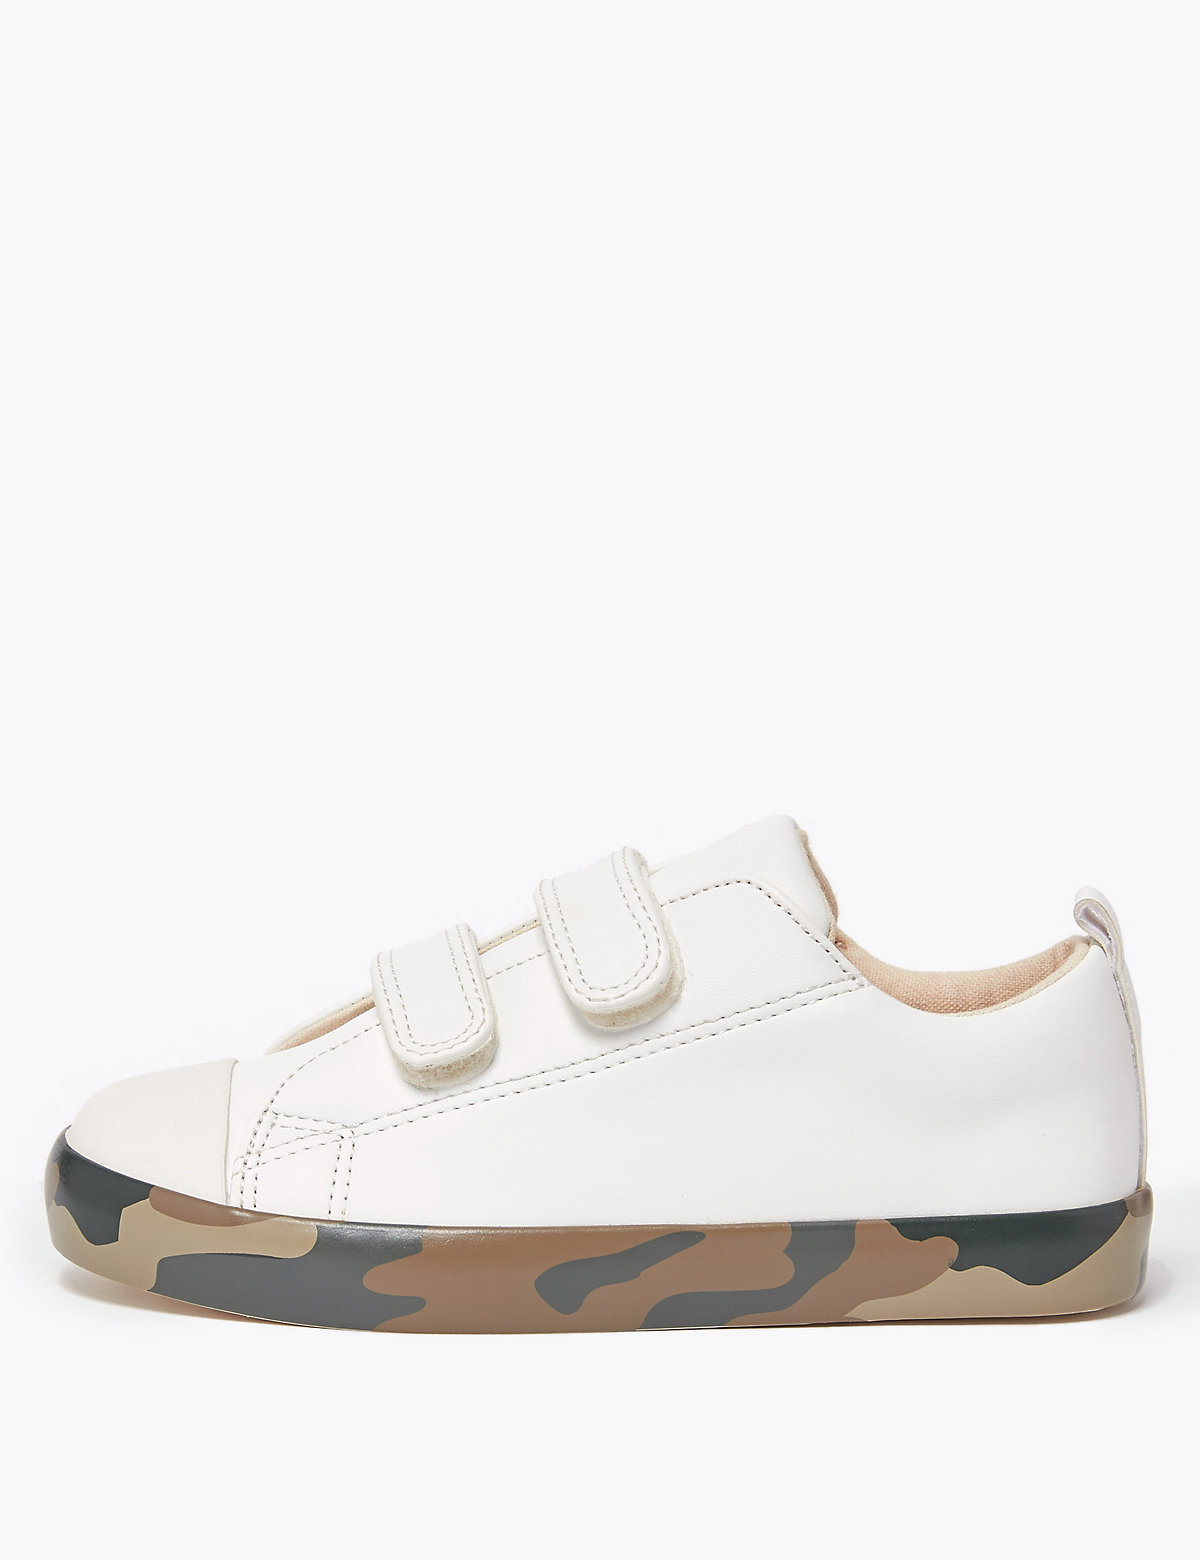 Kids' Camouflage Sole Riptape Trainers